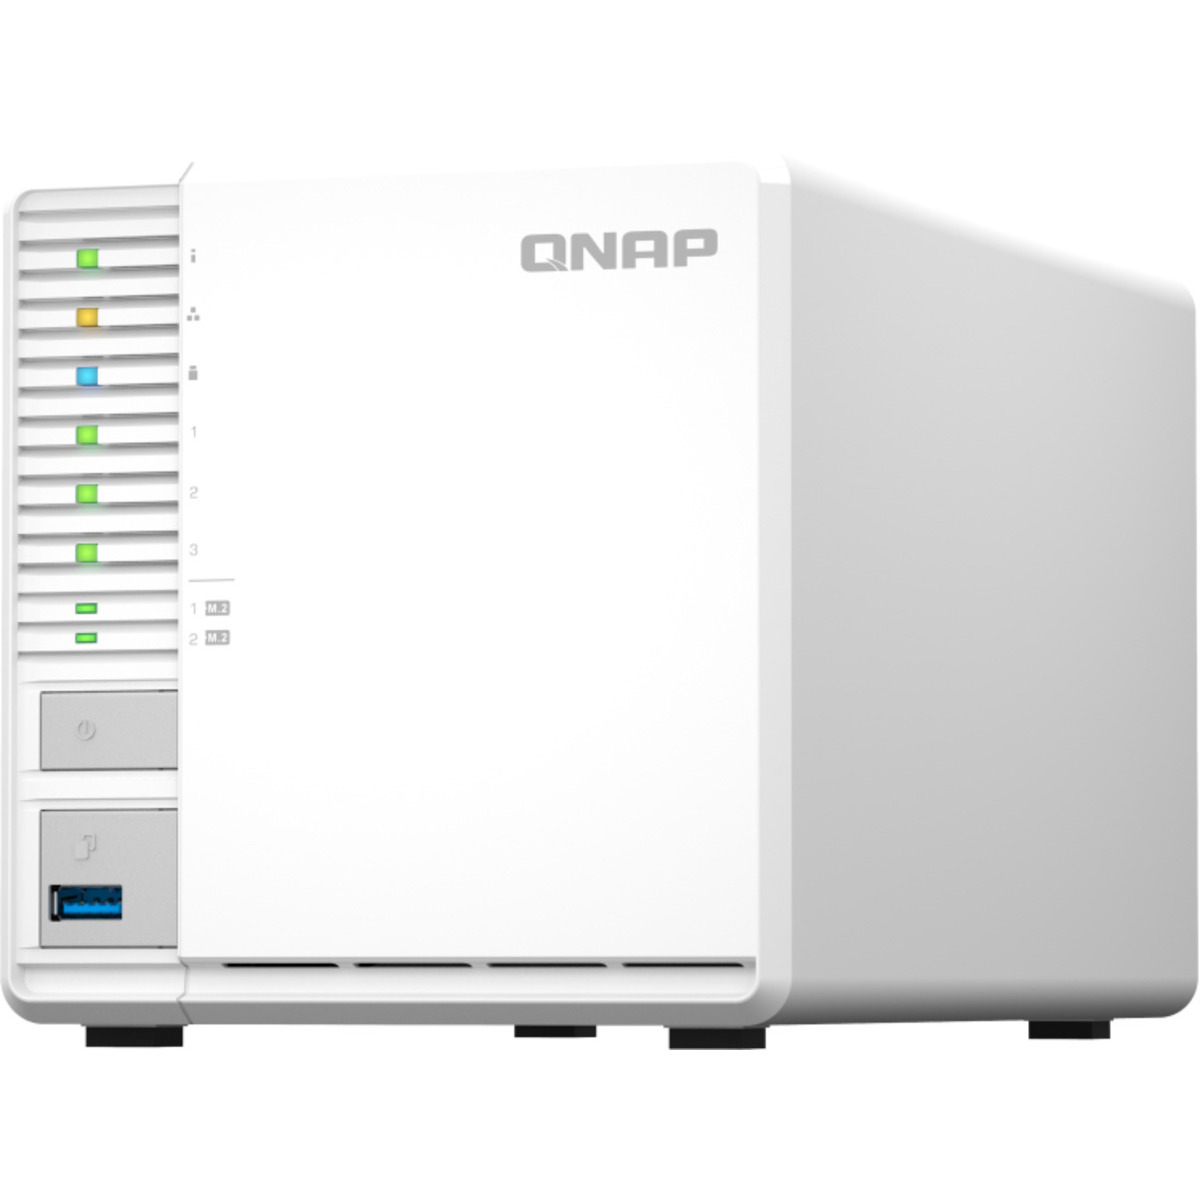 buy $2196 QNAP TS-364 66tb Desktop NAS - Network Attached Storage Device 3x22000gb Seagate IronWolf Pro ST22000NT001 3.5 7200rpm SATA 6Gb/s HDD NAS Class Drives Installed - Burn-In Tested - nas headquarters buy network attached storage server device das new raid-5 free shipping simply usa TS-364